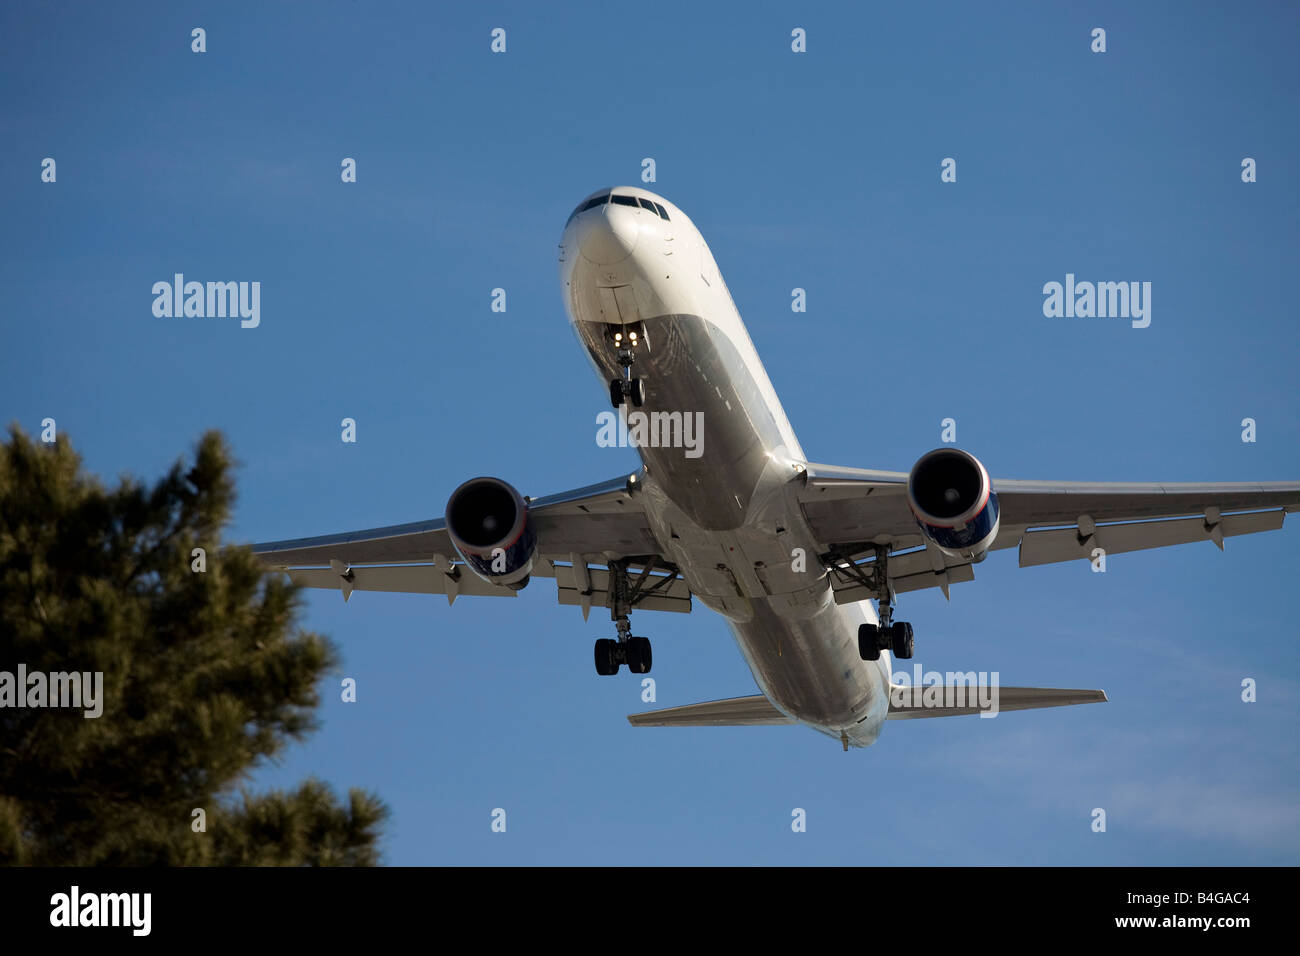 An airplane making a descent Stock Photo